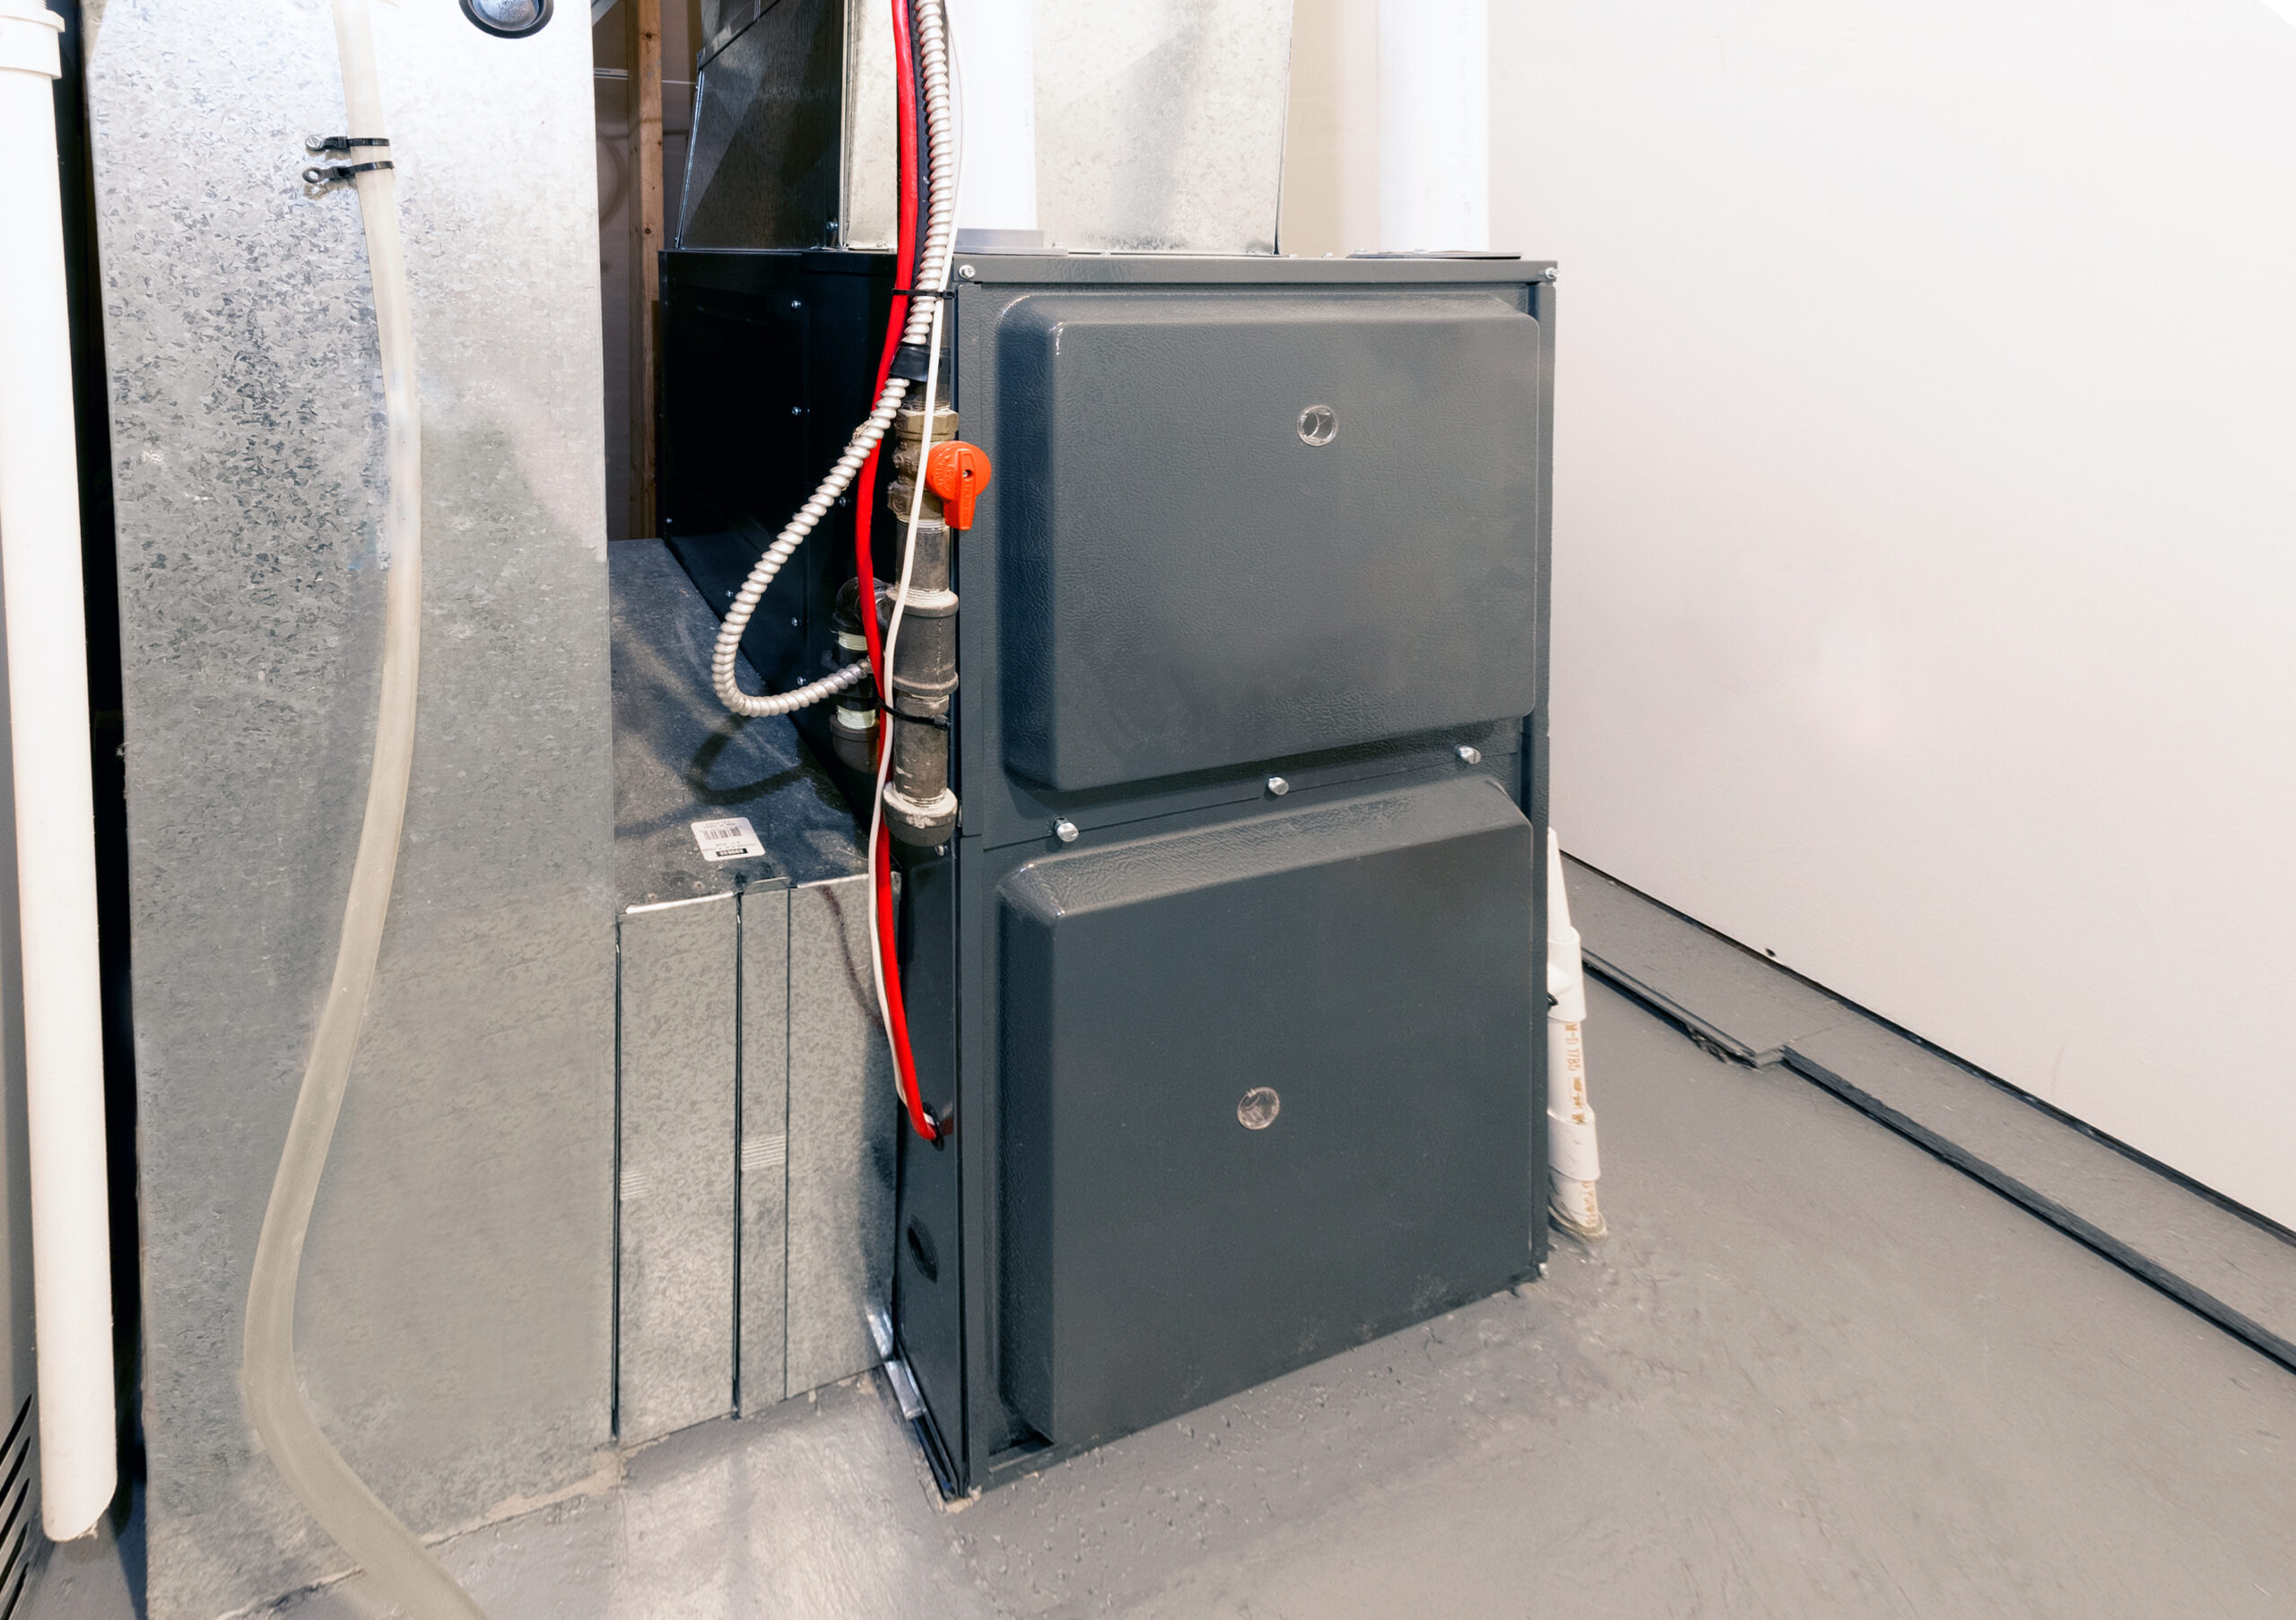 An electric furnace installed in the basement of someone’s home